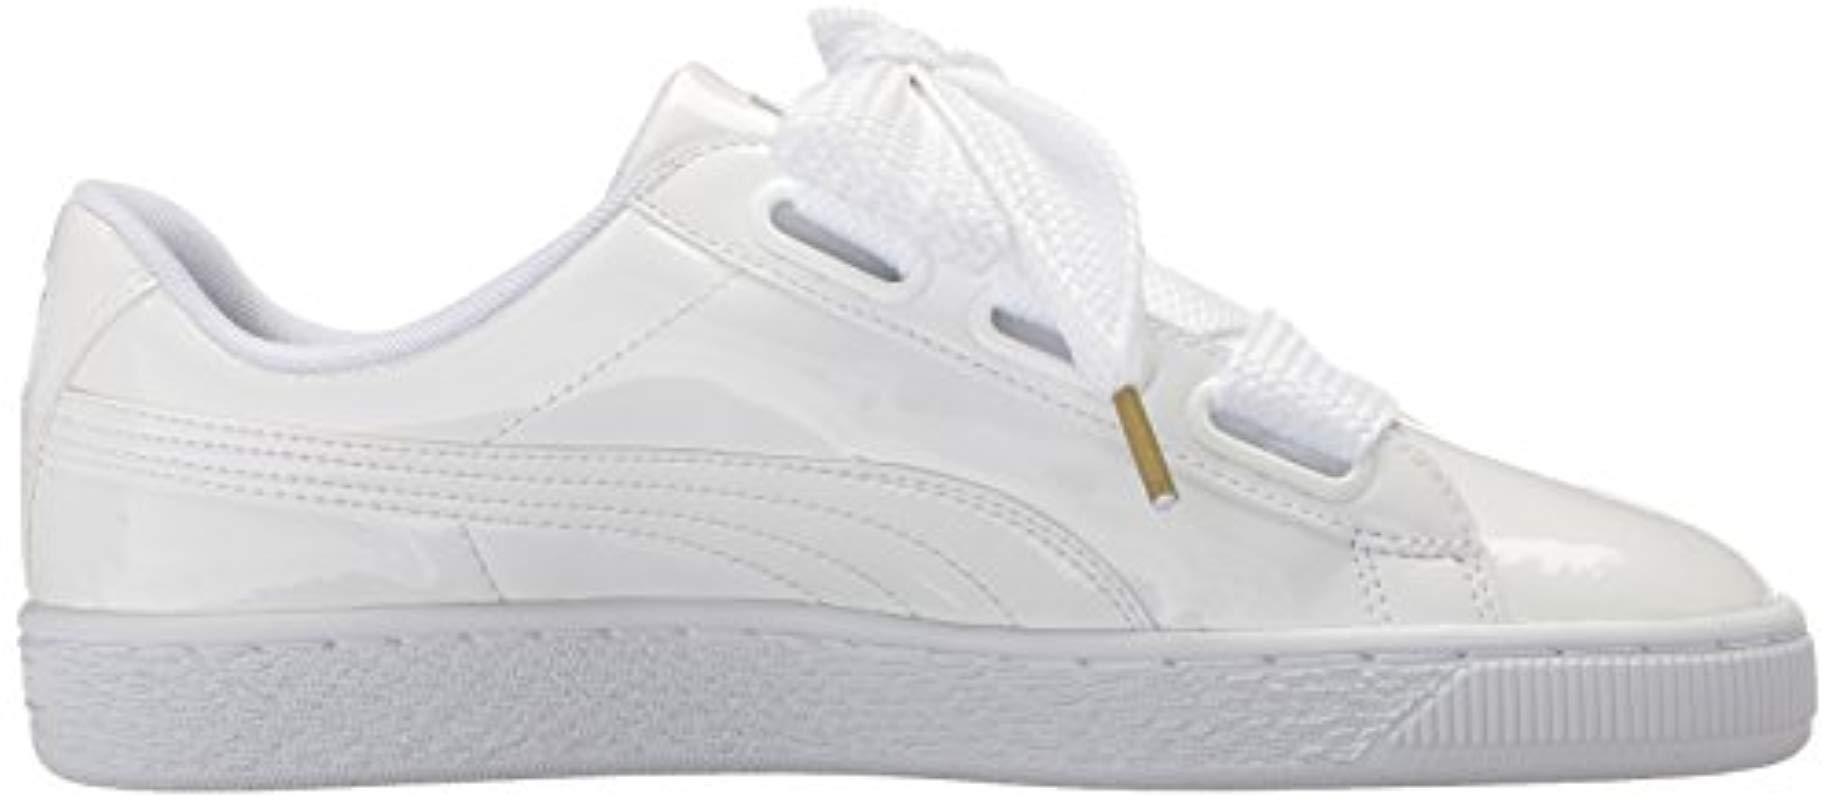 PUMA Basket Heart Patent Wn's Trainers in White Patent (White) - Lyst